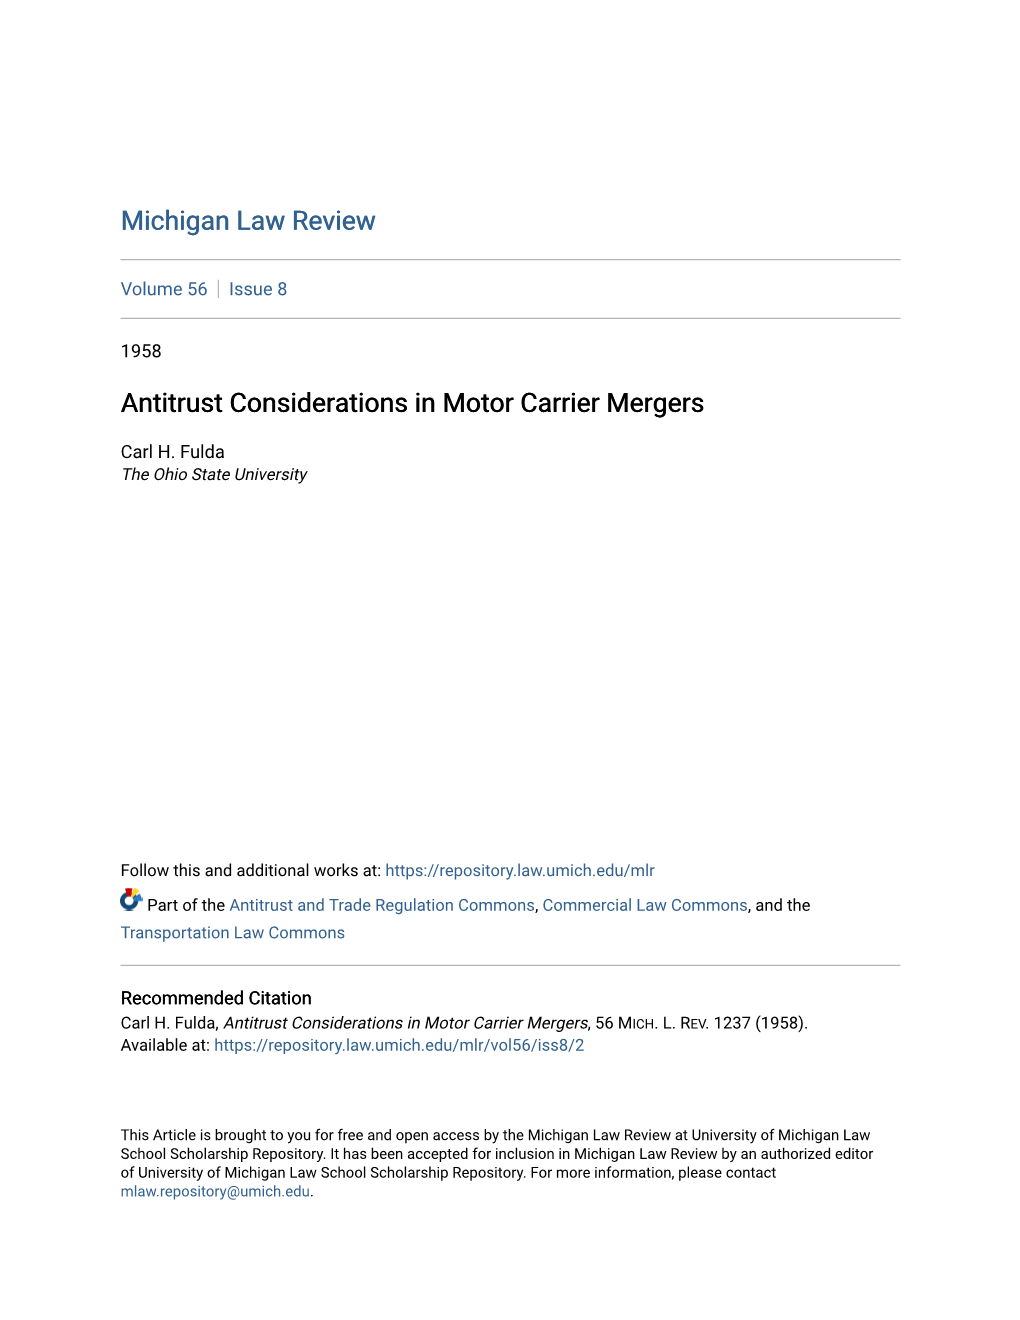 Antitrust Considerations in Motor Carrier Mergers